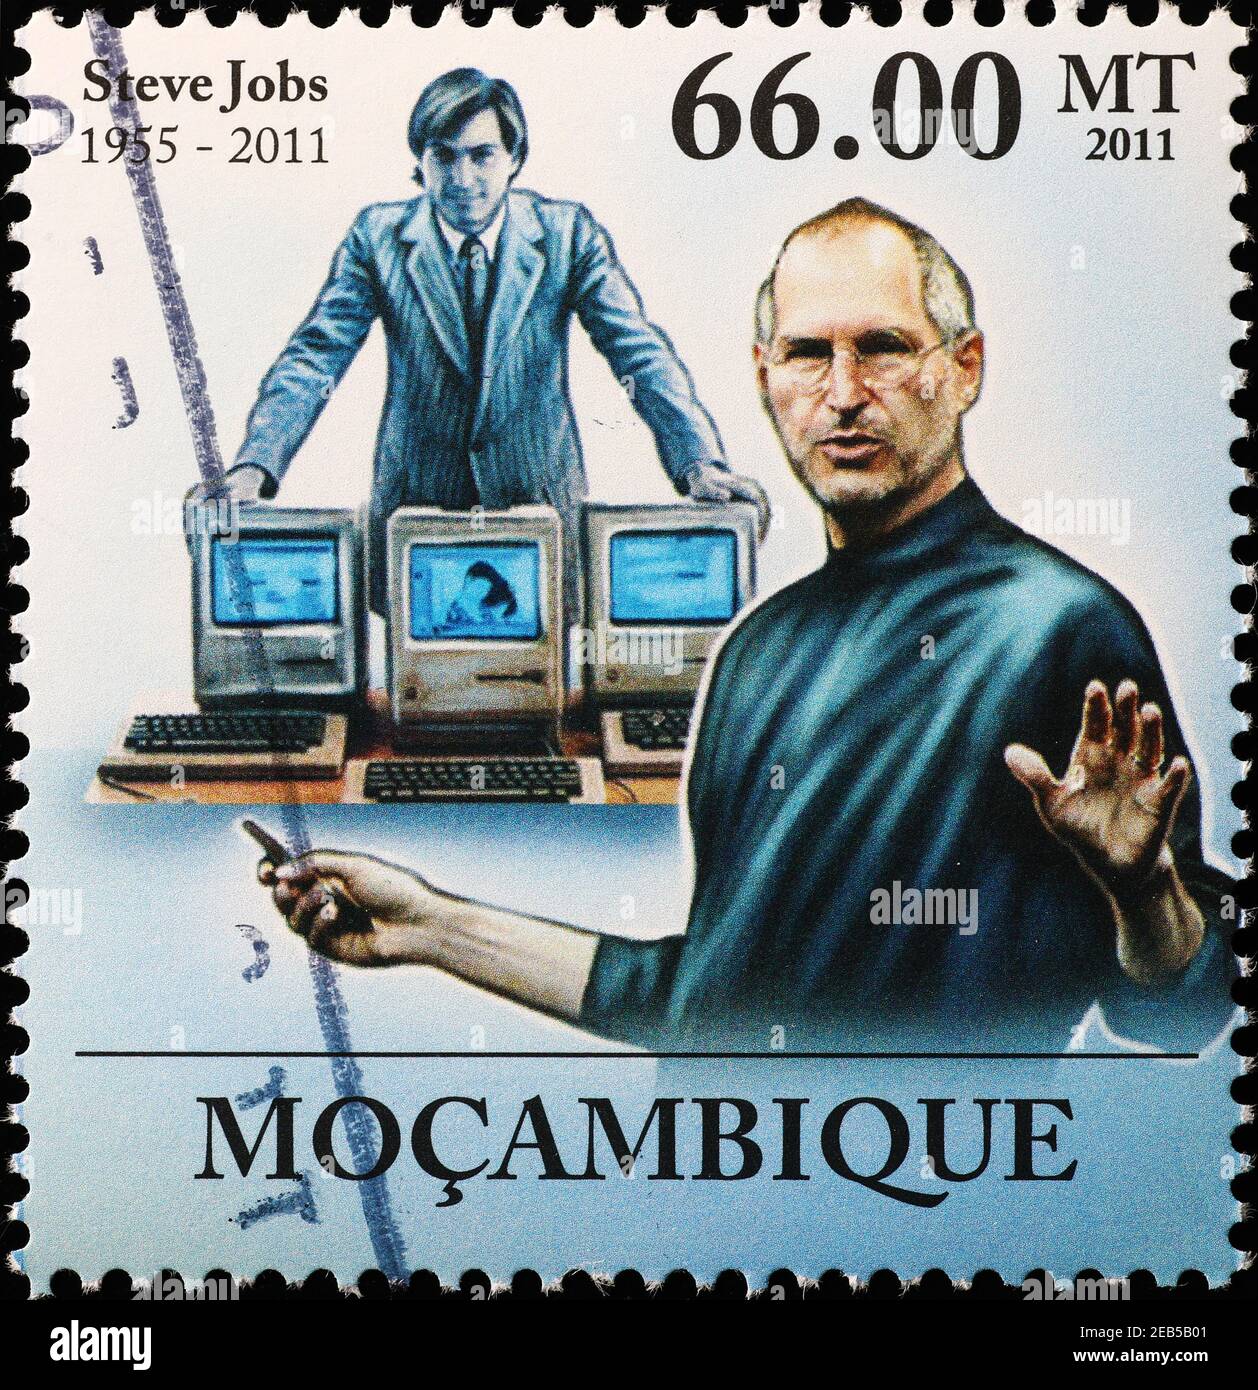 Steve Jobs during a speech on postage stamp Stock Photo